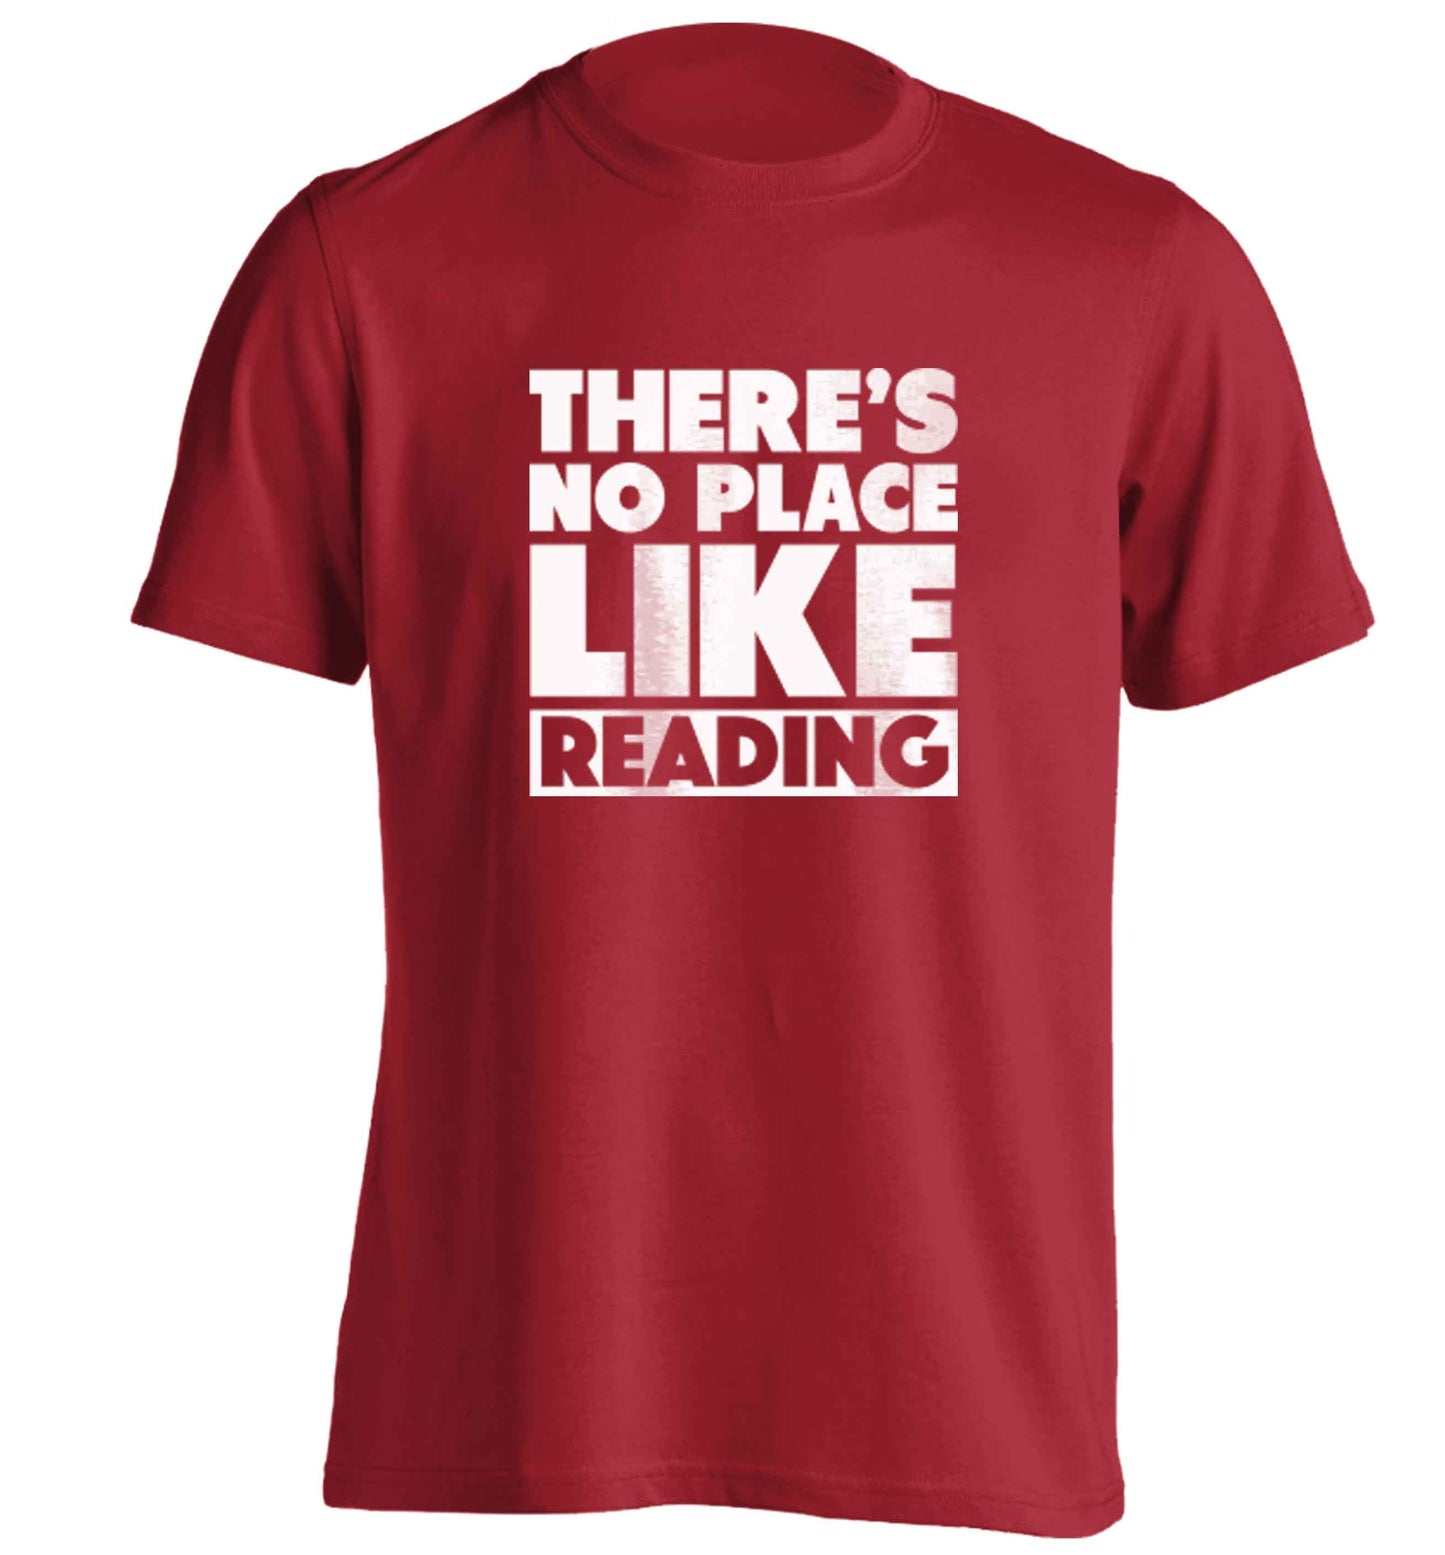 There's no place like Readingadults unisex red Tshirt 2XL